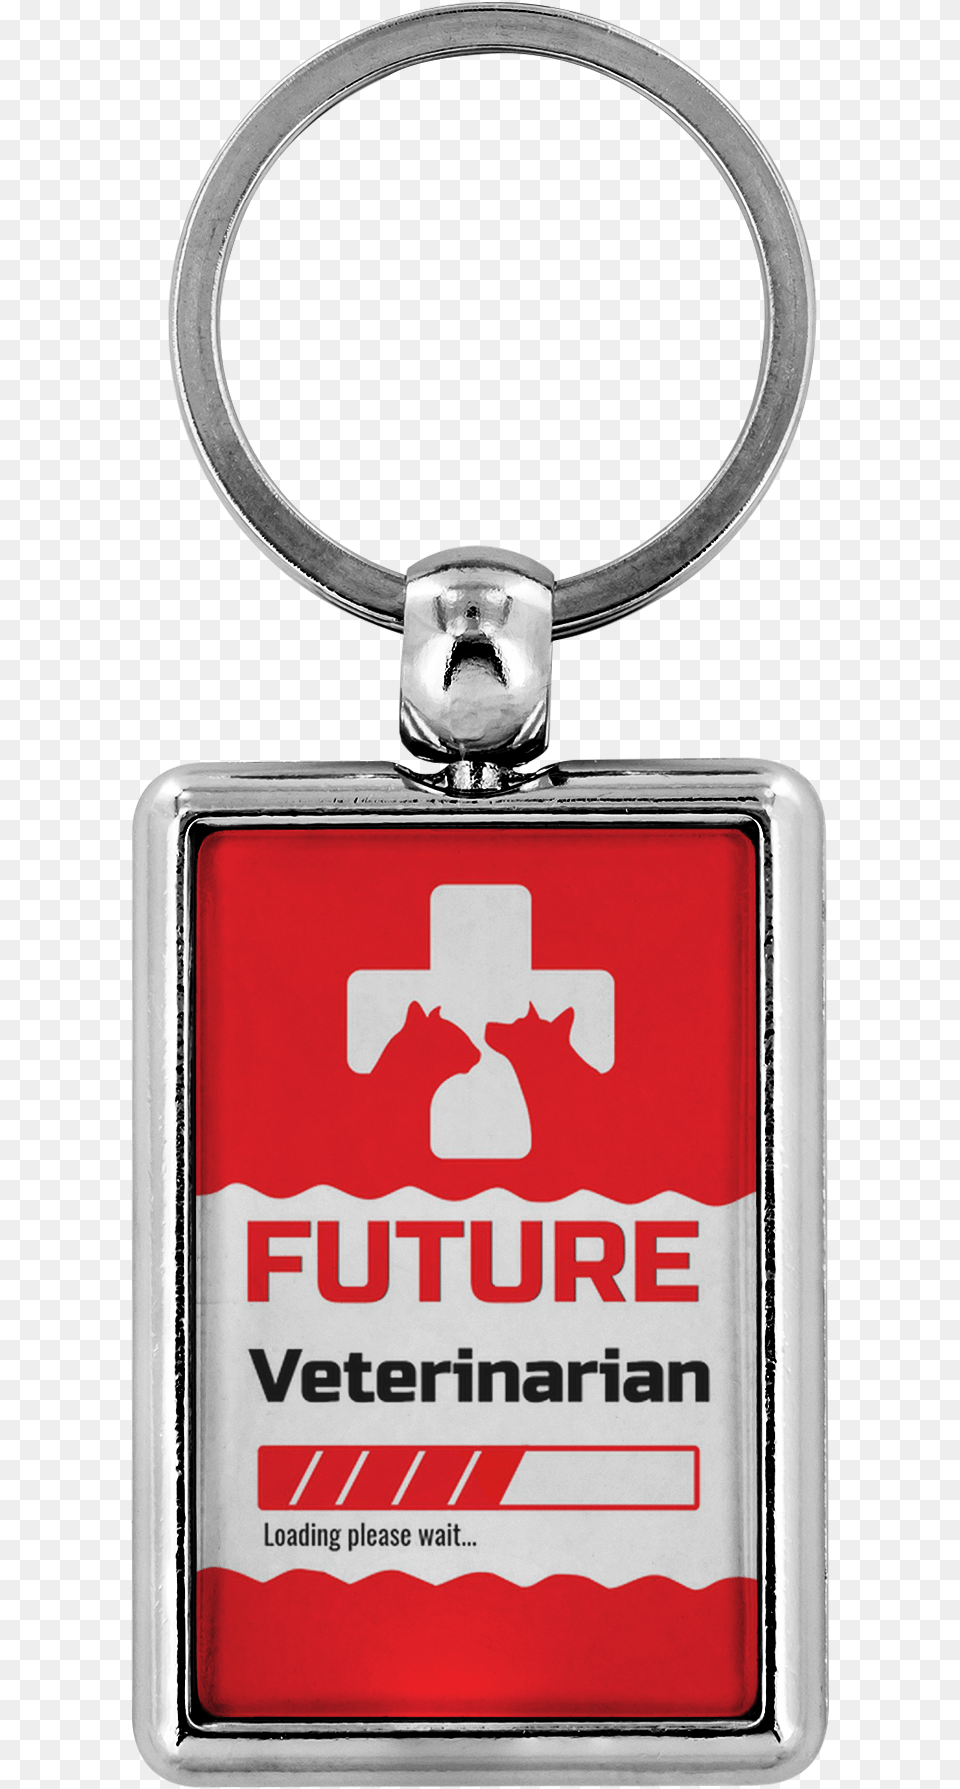 Funny Future Veterinarian Loading Please Wait Key Chain Keychain, Accessories, First Aid, Bottle, Cosmetics Free Png Download